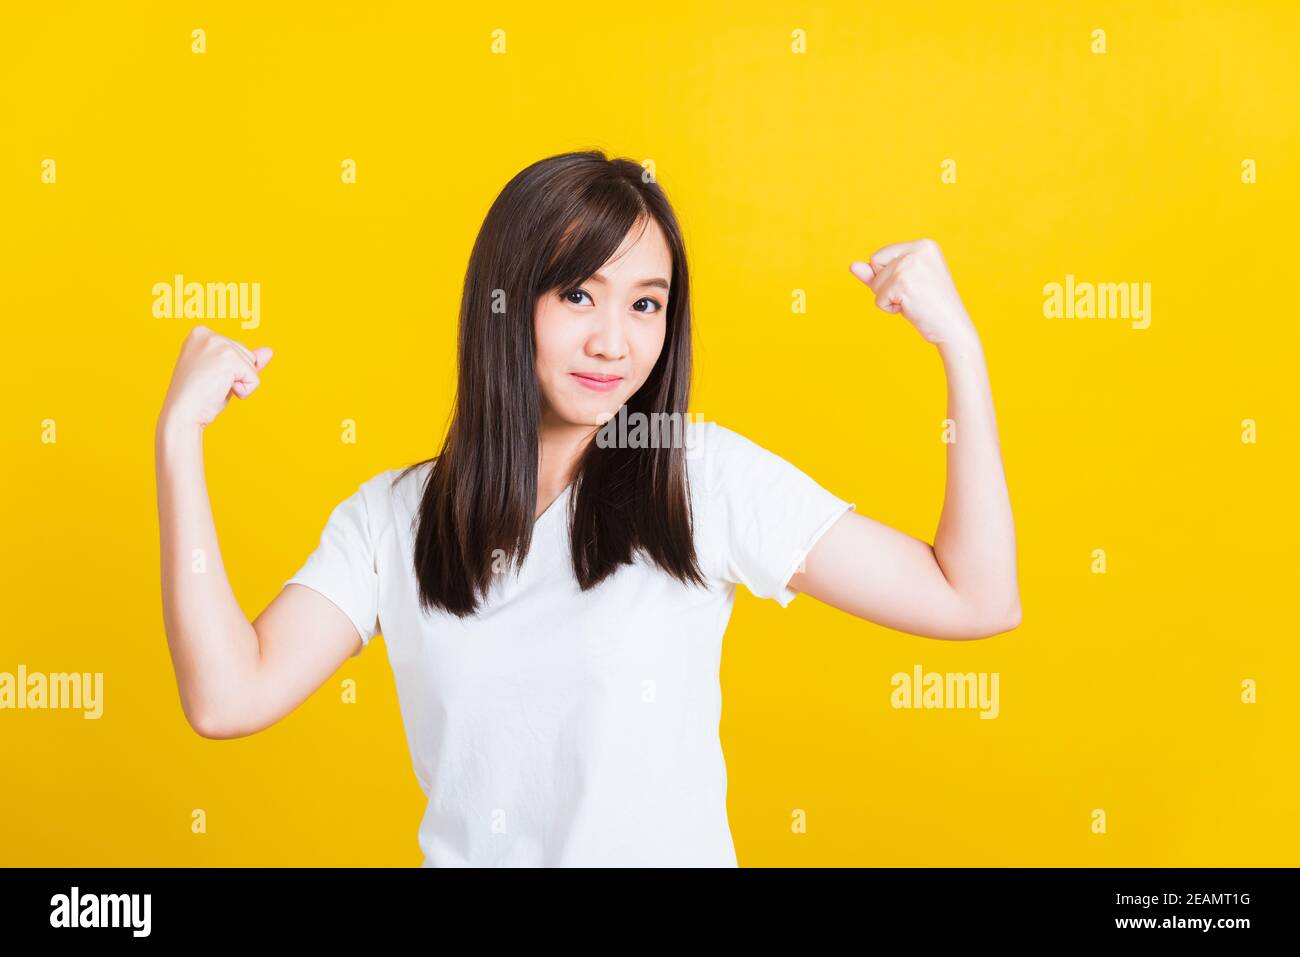 Young woman raises arms biceps confident showing power and strength Stock Photo